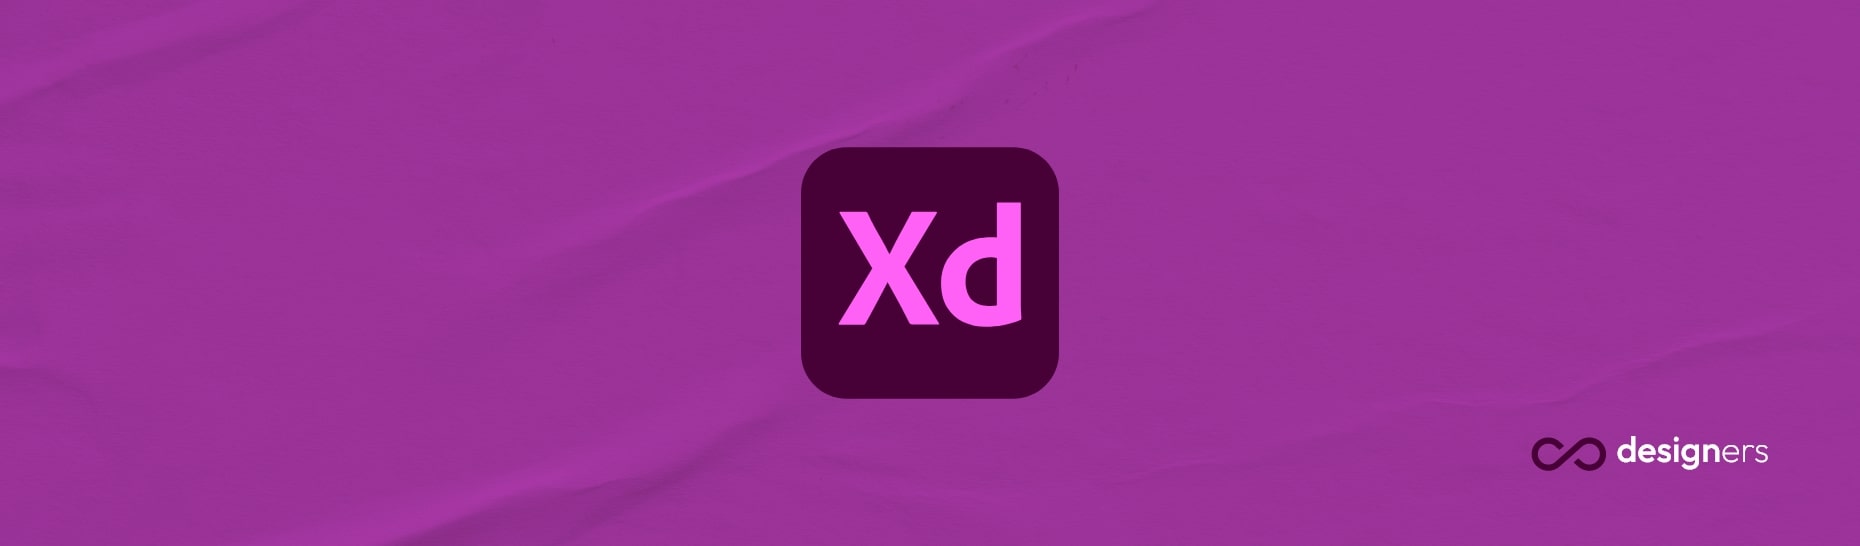 Is Adobe XD free or paid?